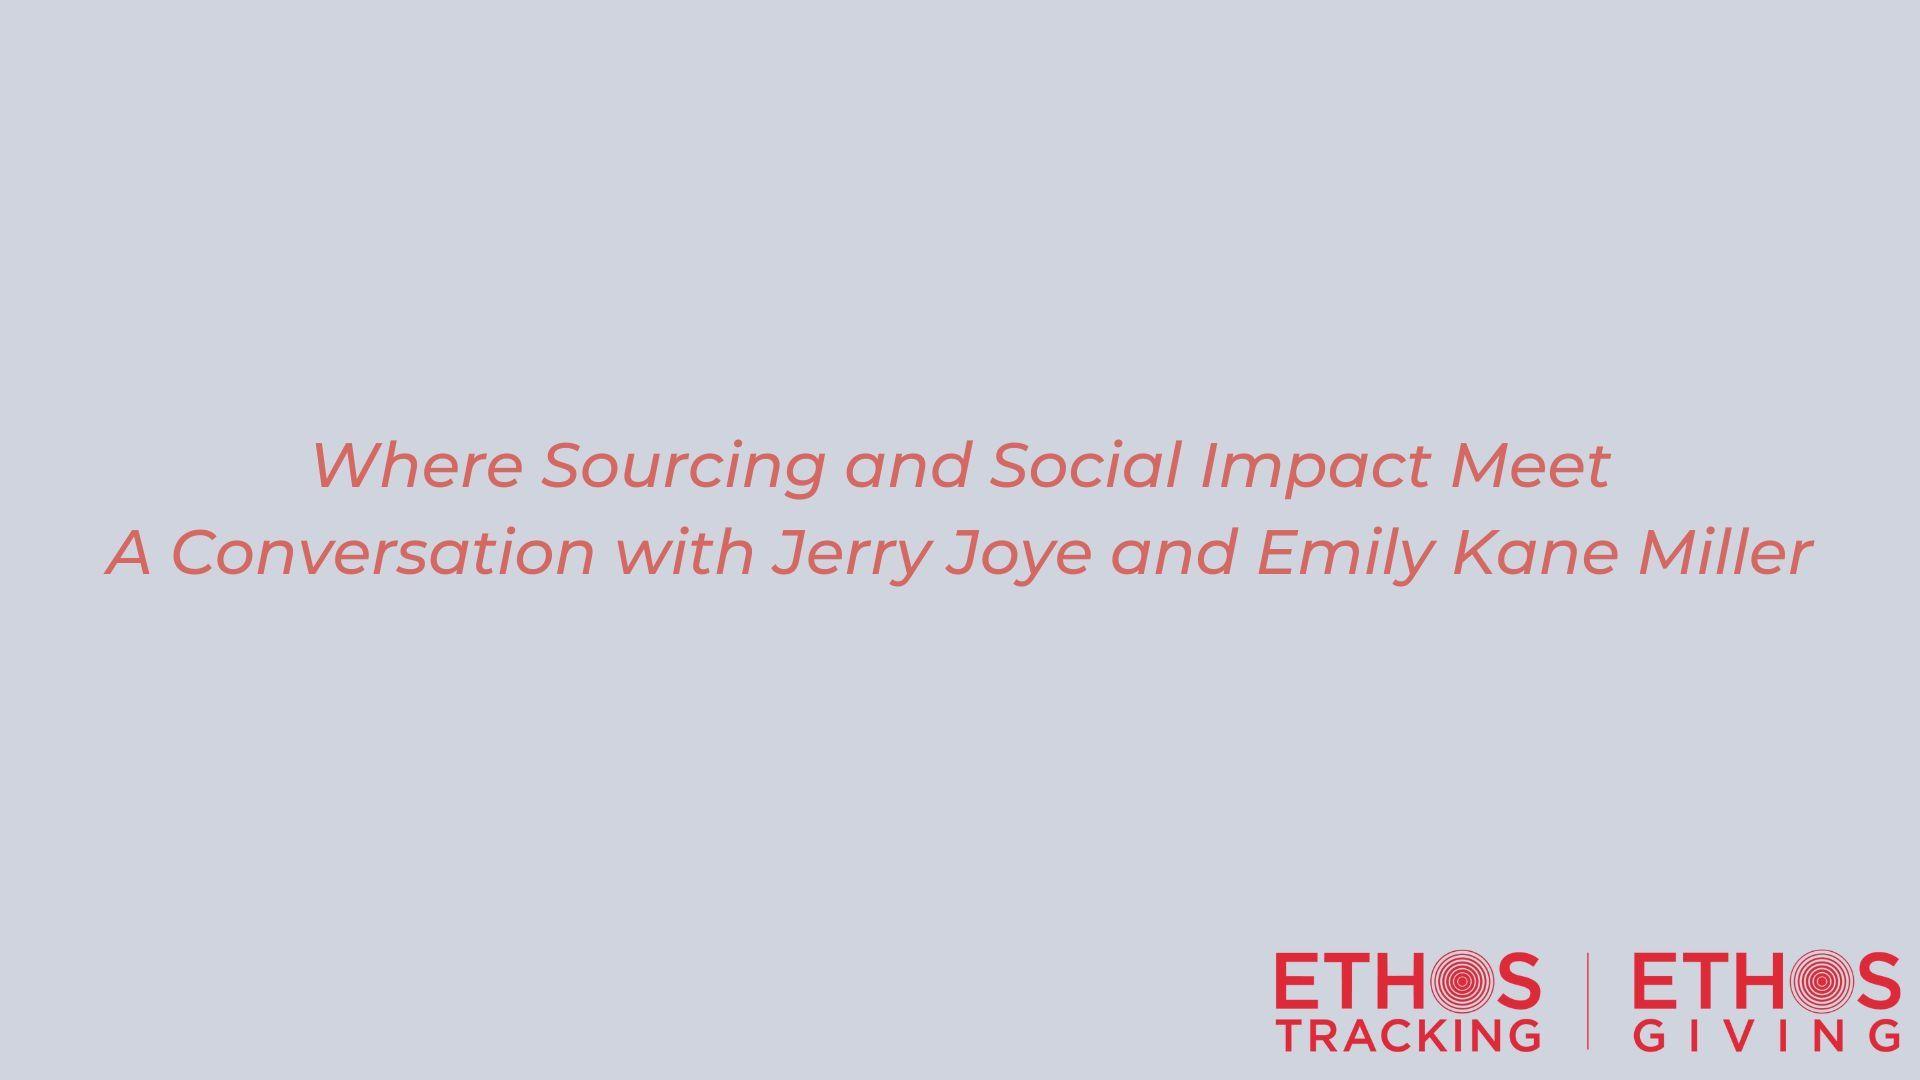  Where Sourcing and Social Impact Meet: A Conversation with Jerry Joye and Emily Kane Miller